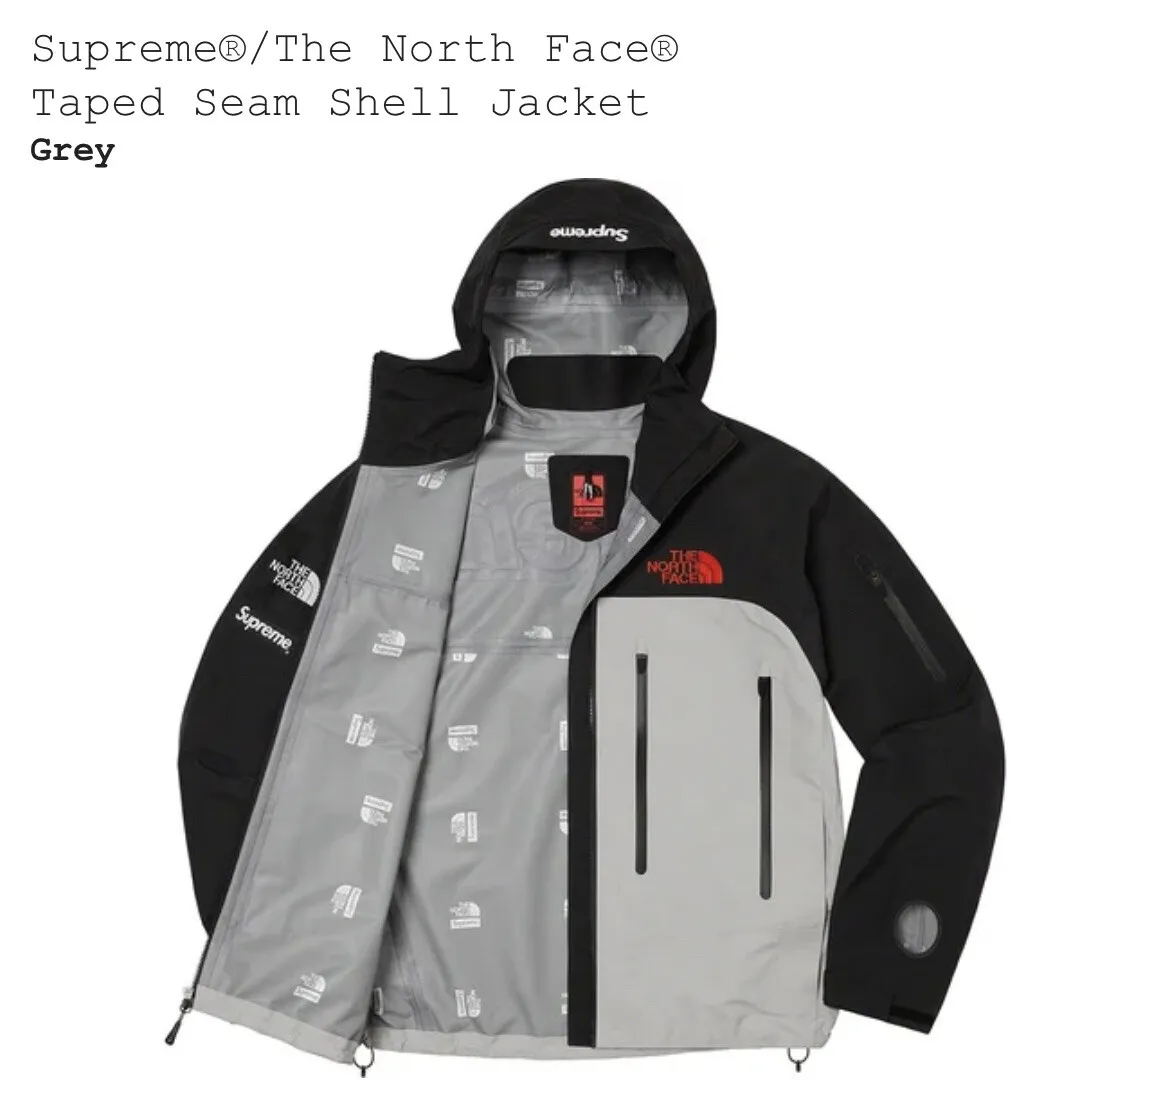 New Supreme® x The North Face® Taped Seam Shell Jacket - Grey 